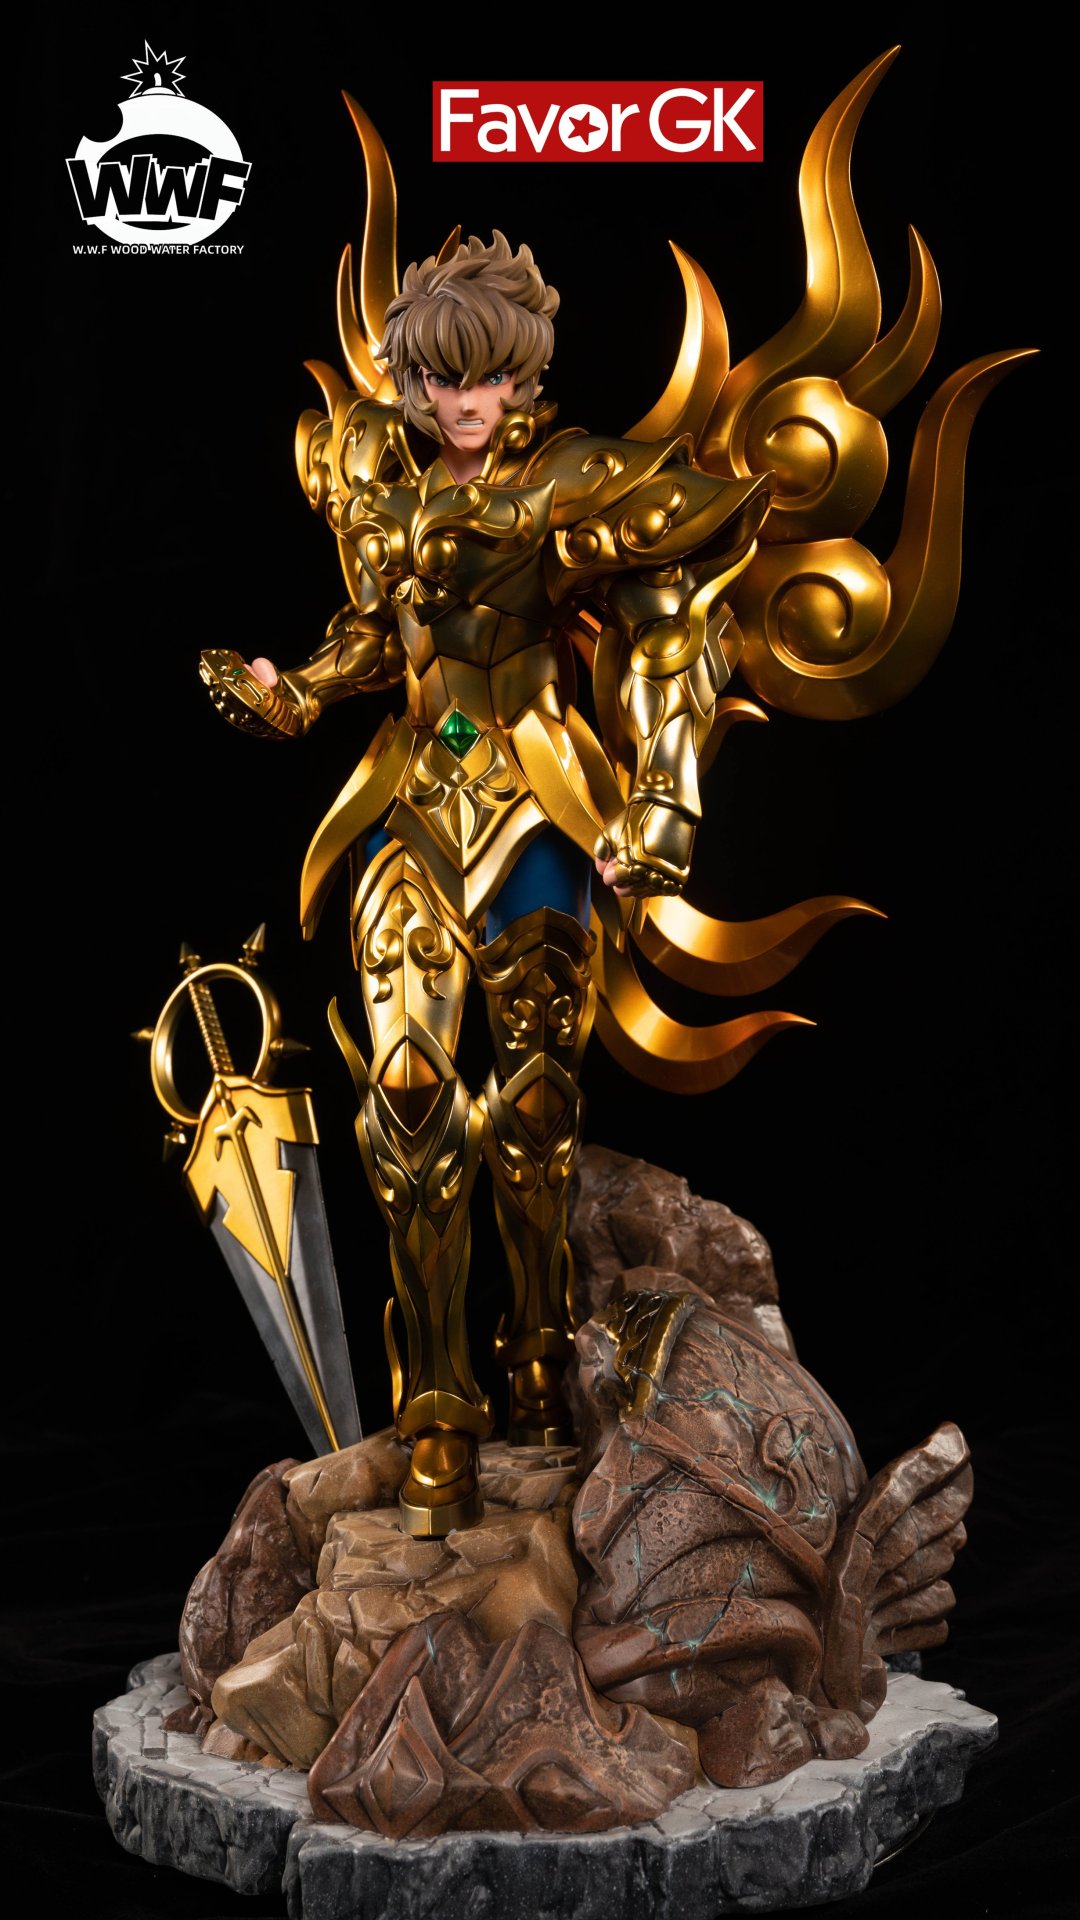 Anime Collect – Online Store selling Anime Resin Statues and Figurine